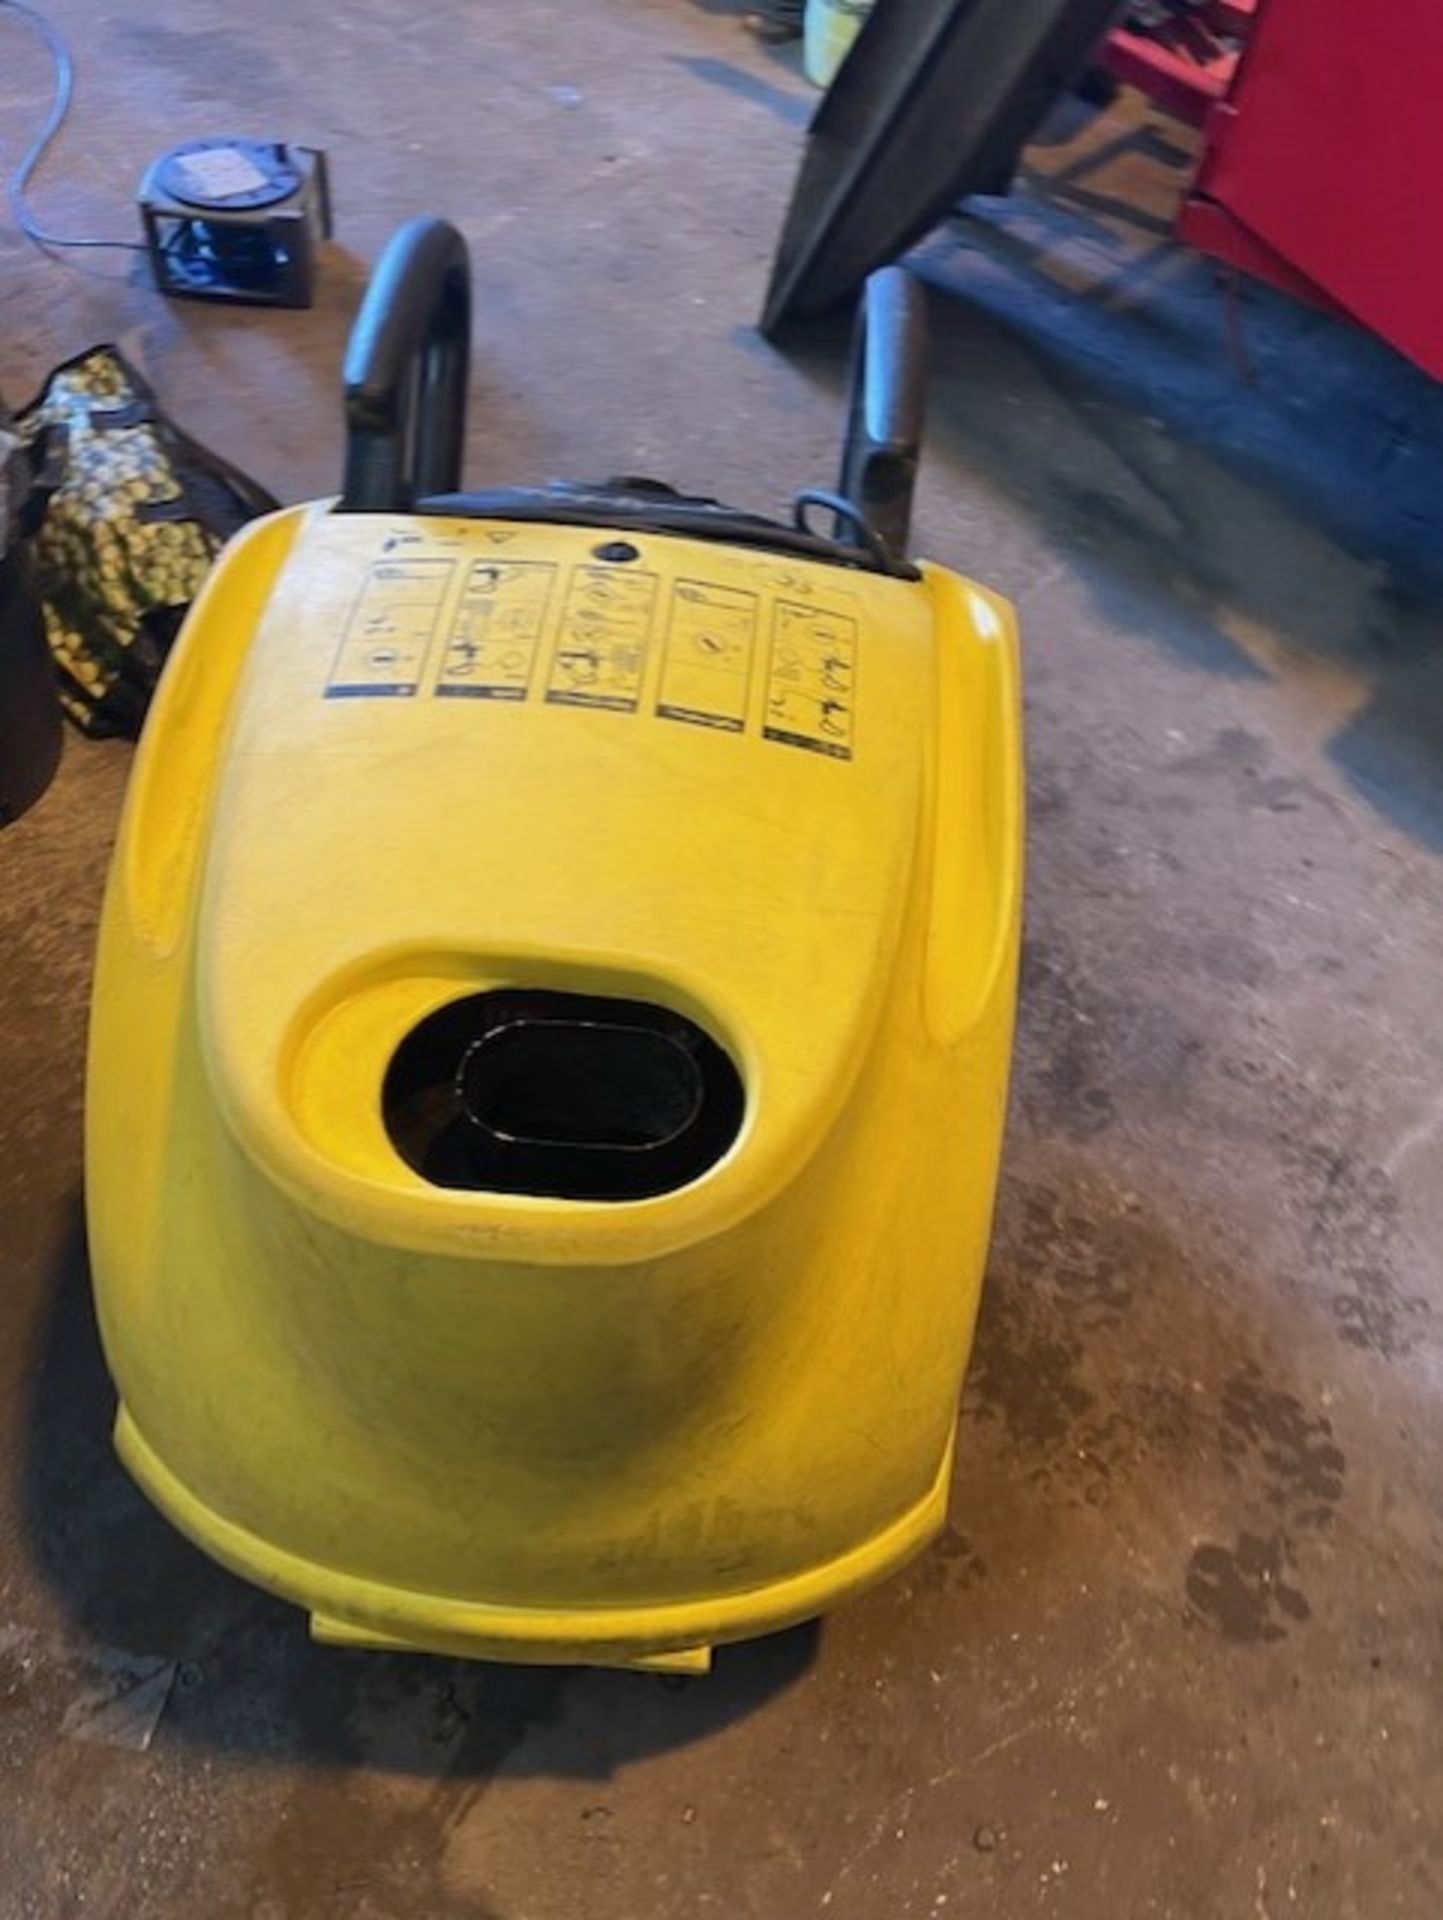 Karcher hot and cold pressure washer hds551 c model it’s in good condition still comes with hose and - Image 5 of 10